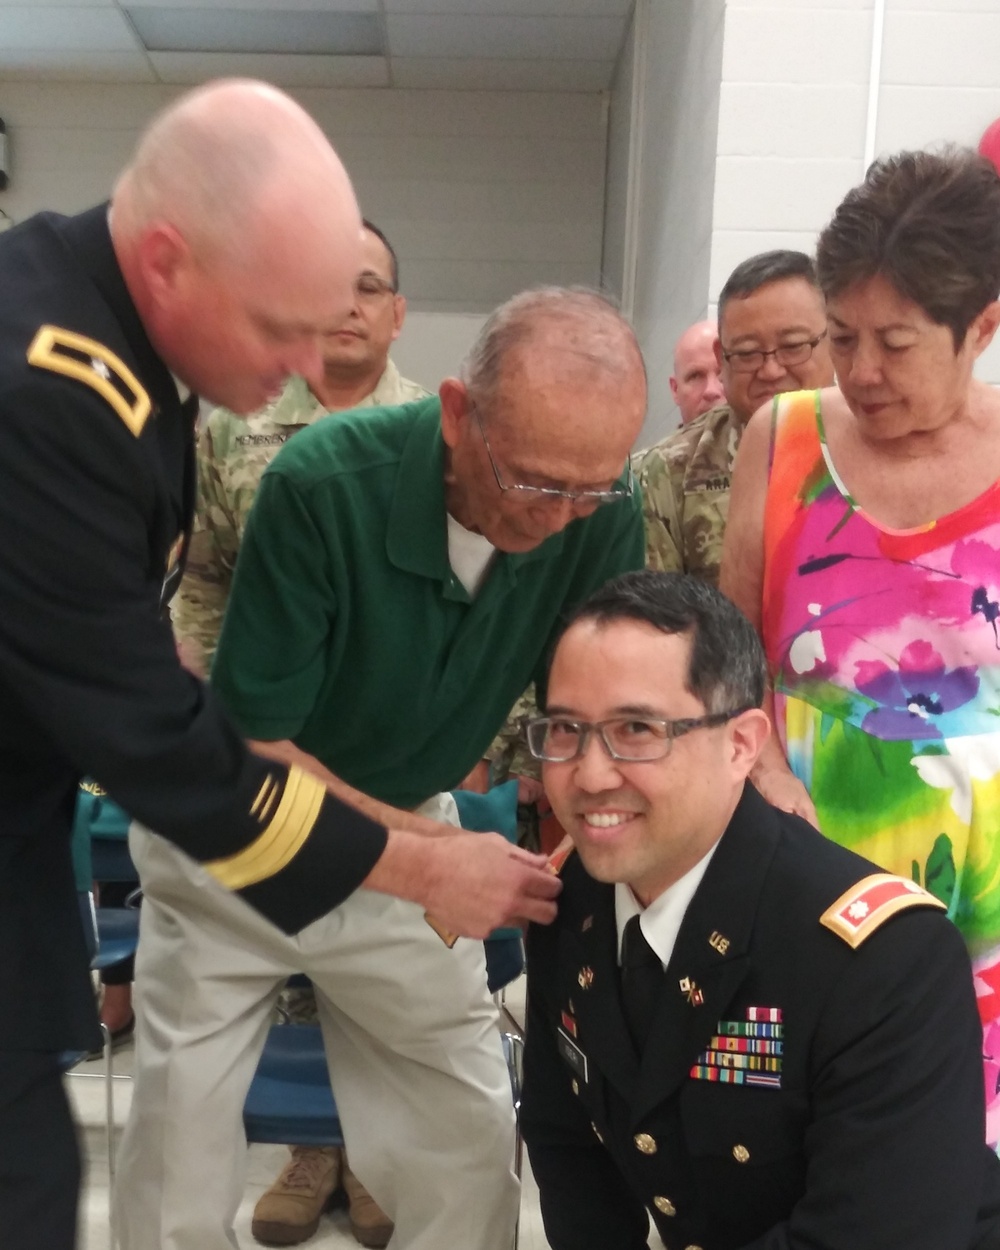 Col. Iseri promoted by parents and commanding general